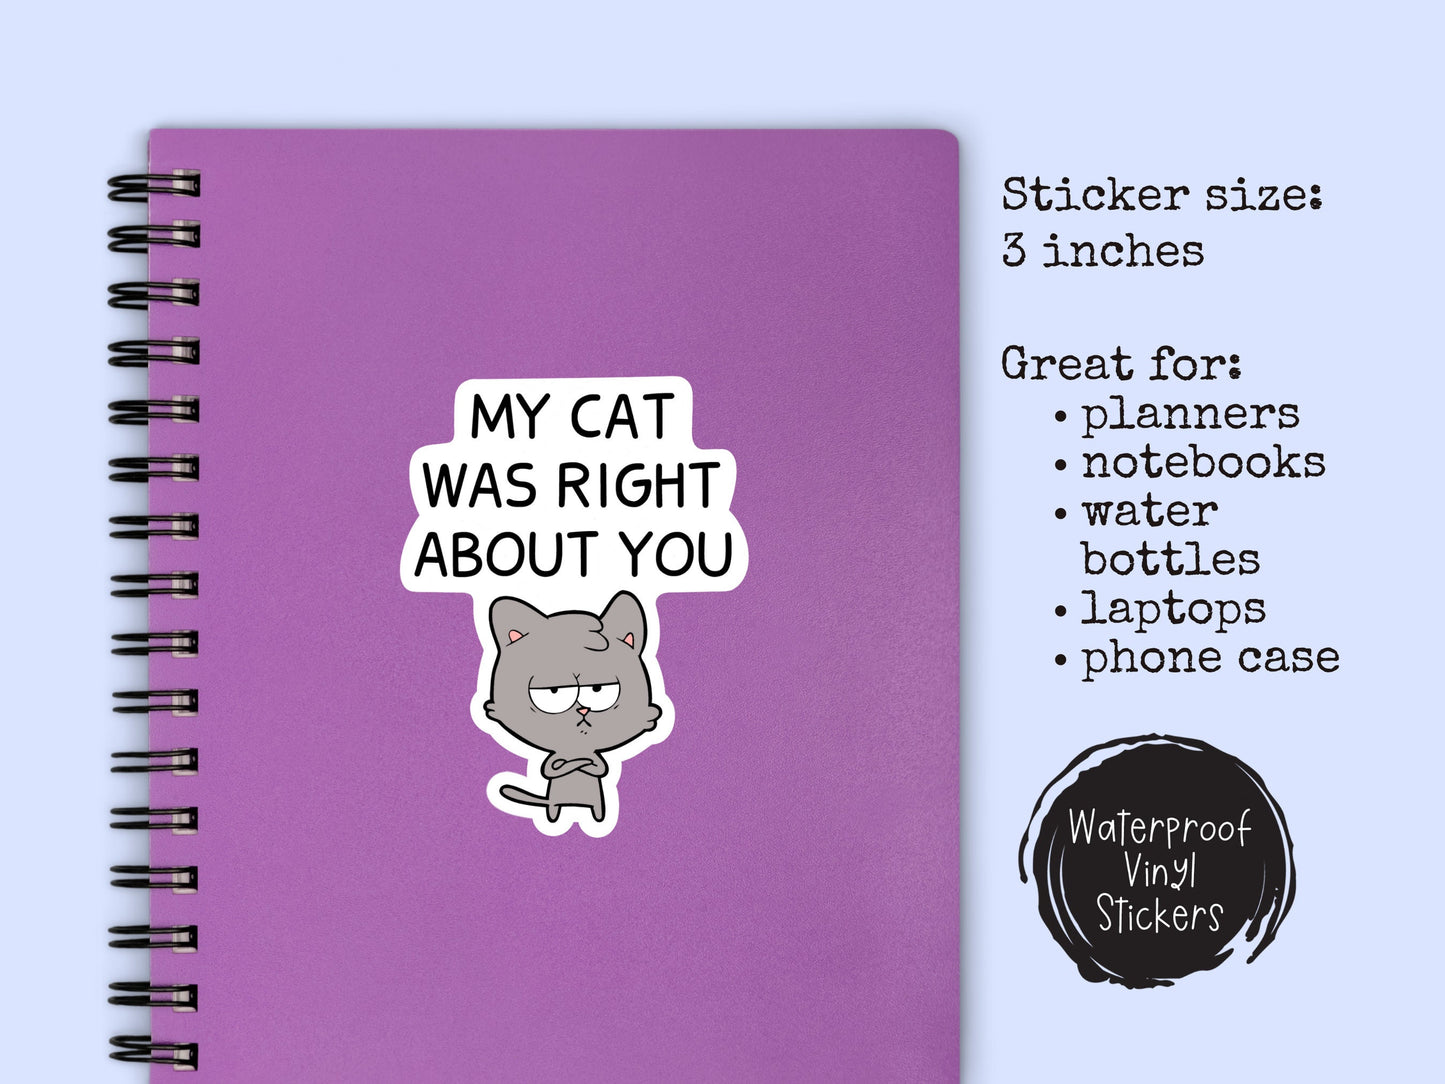 My Cat Was Right About You Sticker Funny Cat Sticker